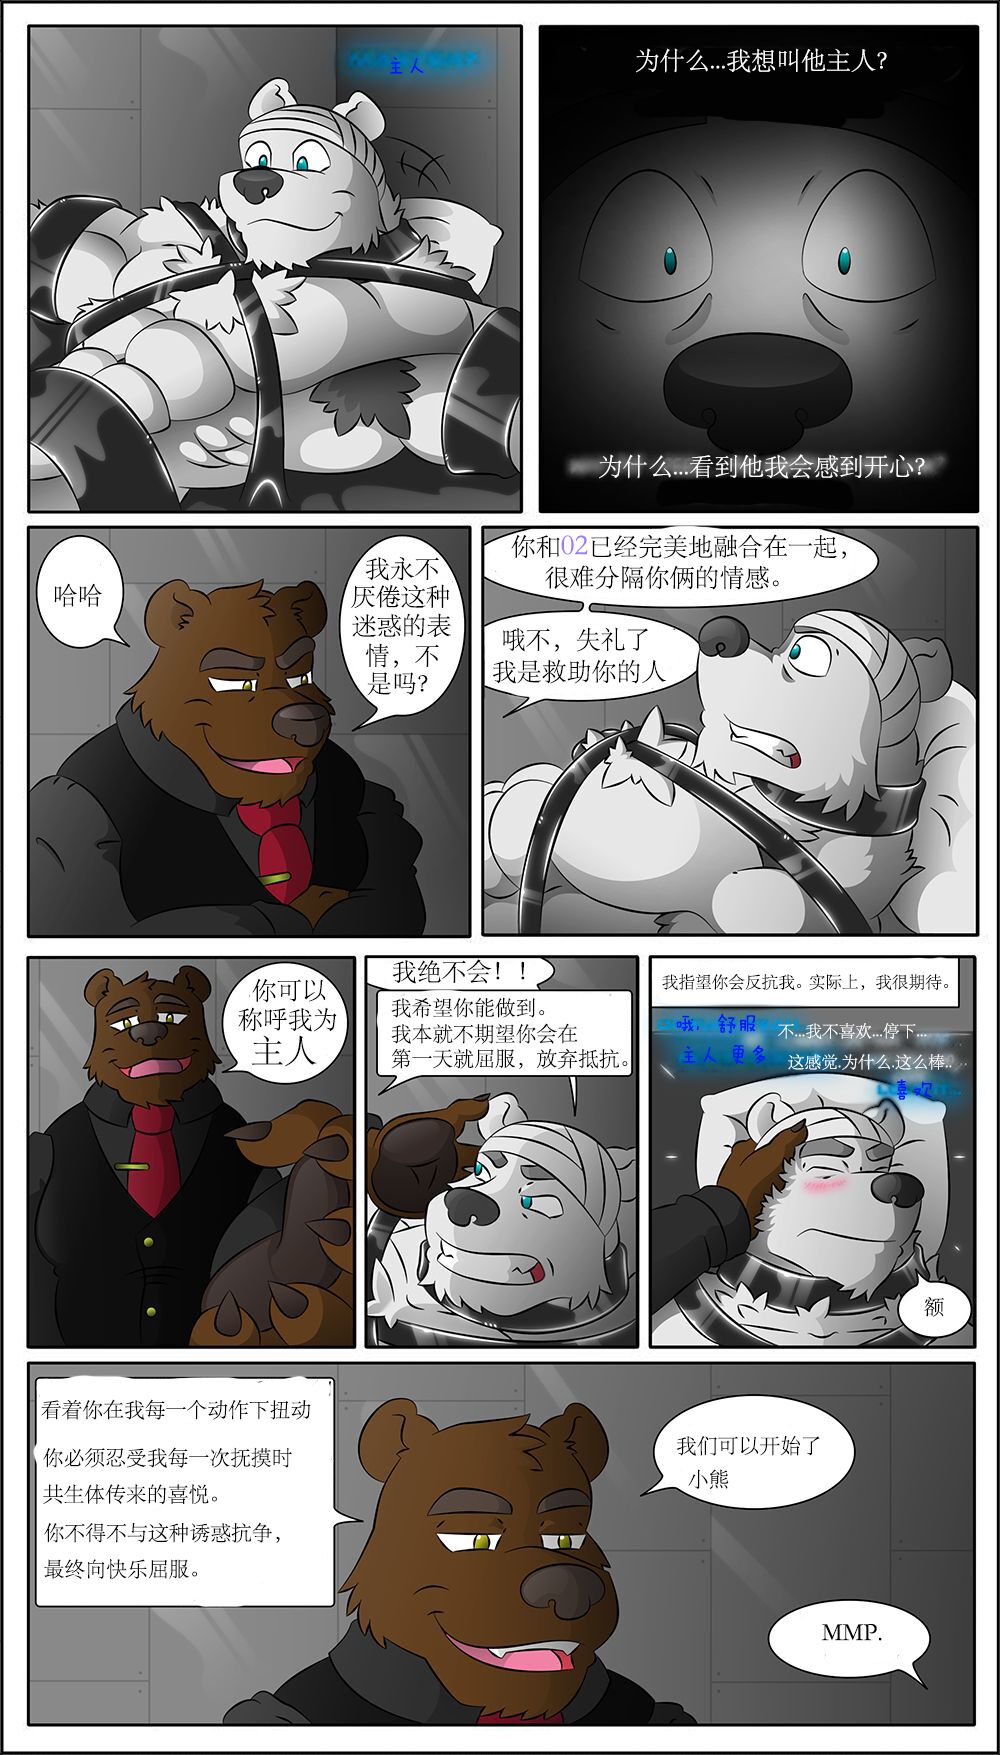 [Rubberbuns] Convergence (Ongoing)[chinese] 